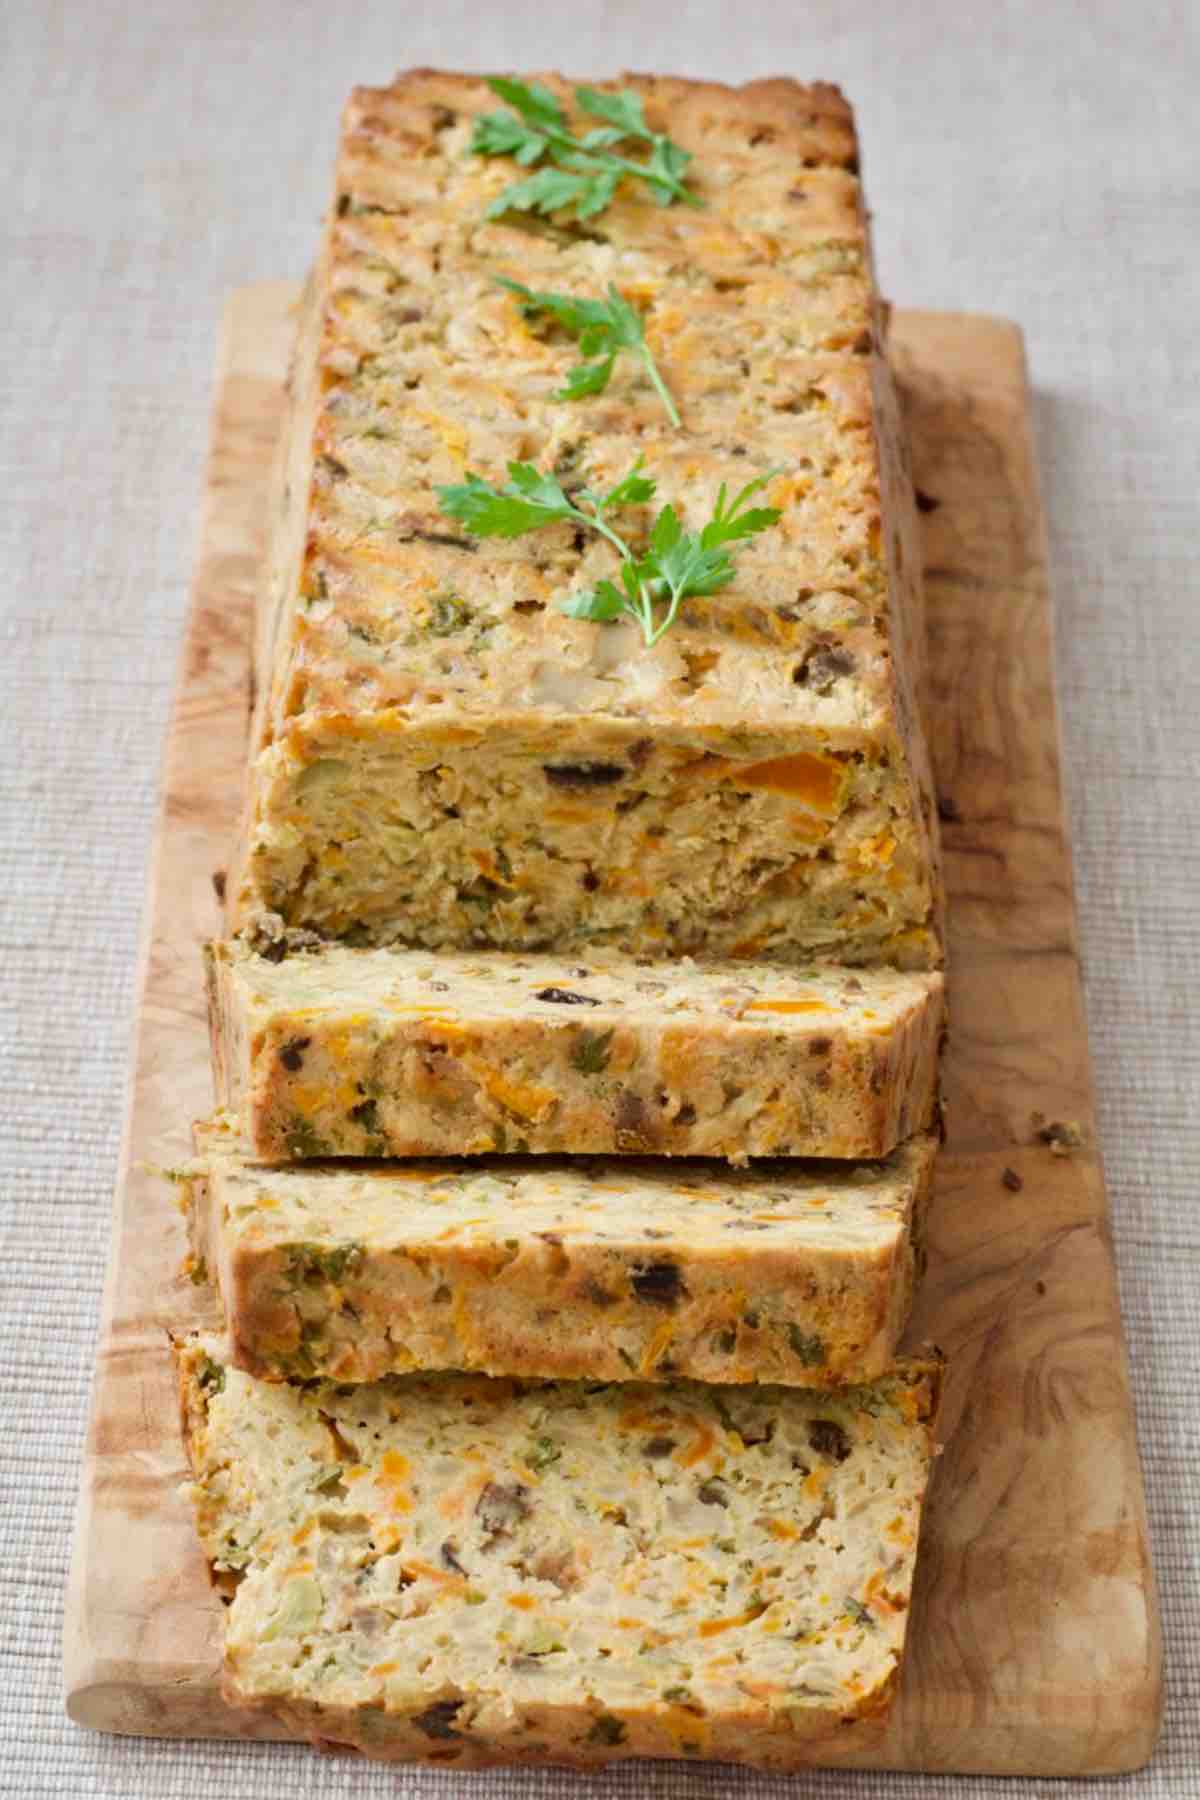 Celeriac veggie loaf on a board with three slices cut to show the inside.